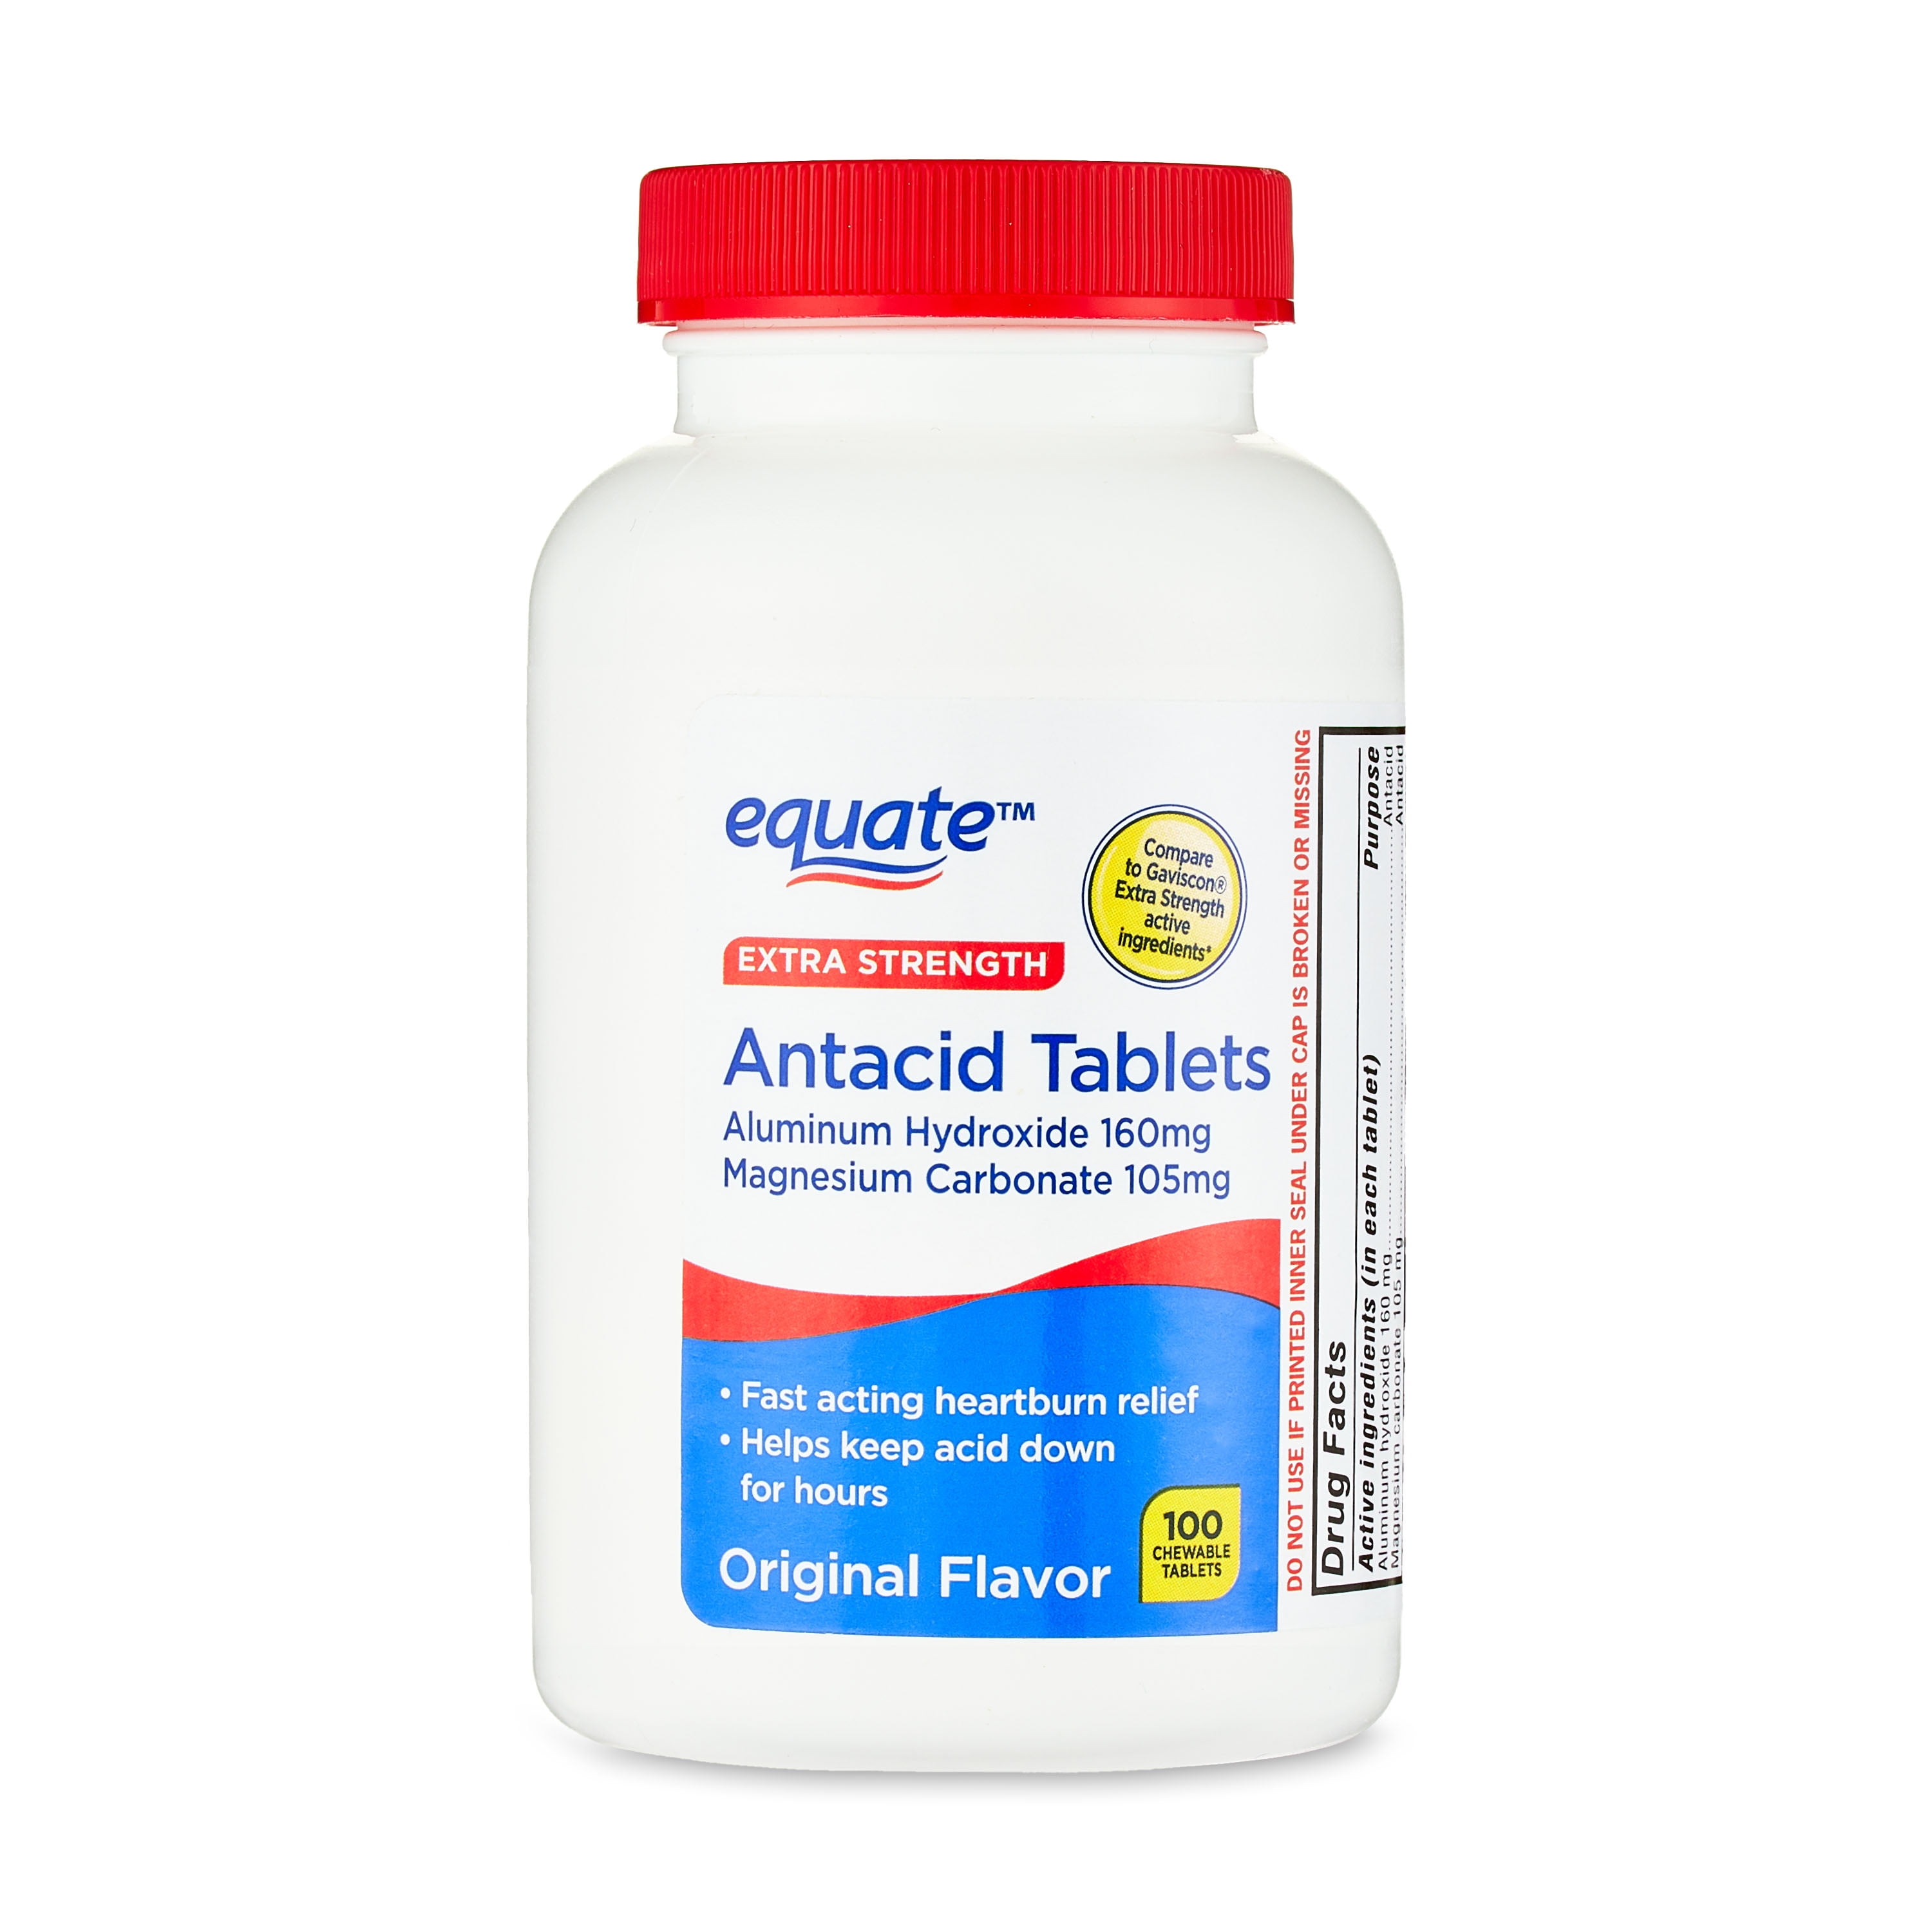 Equate Extra Strength Antacid, Upset Stomach, Chewable Tablets, over the Counter, 160 mg, 100 Count